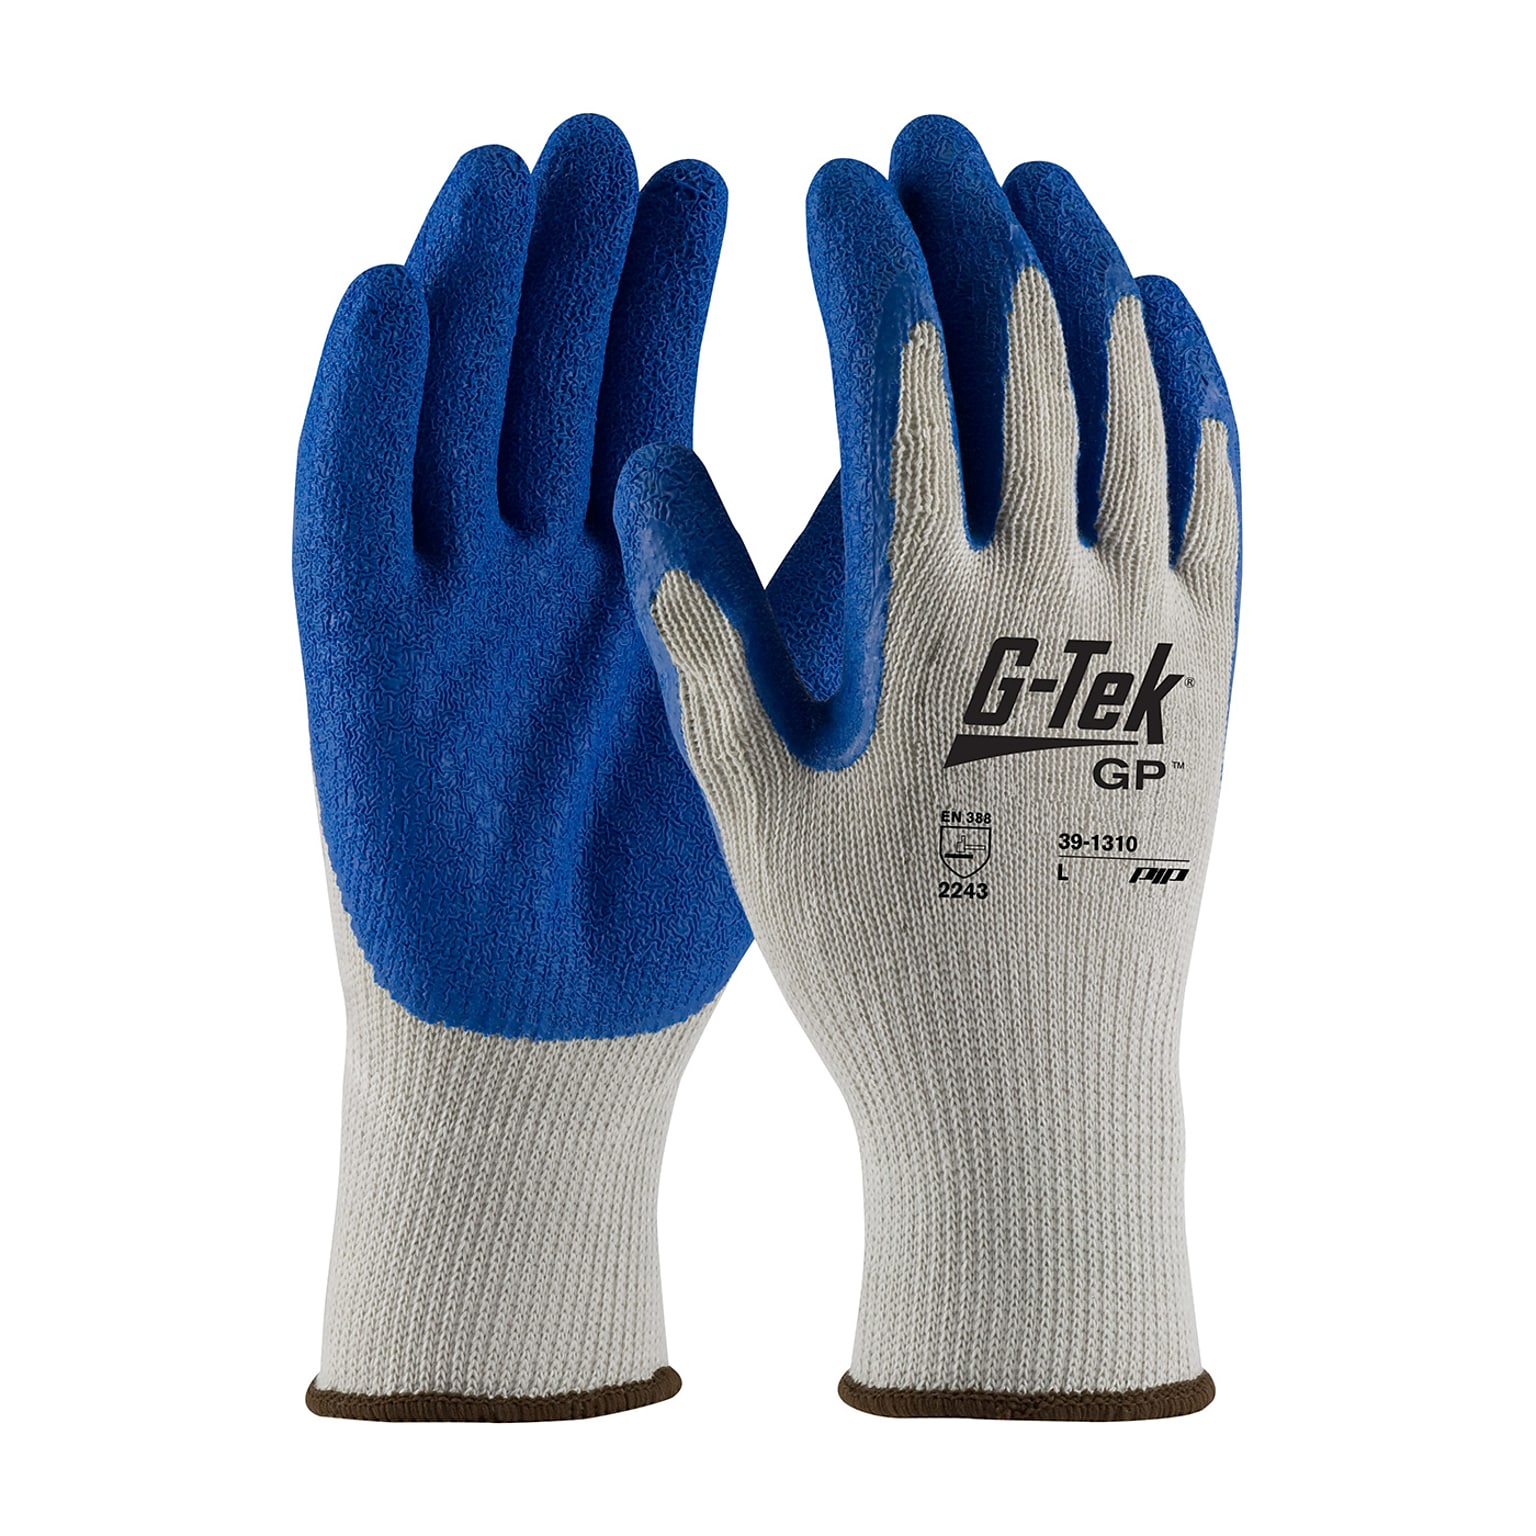 G-Tek Coated Work Gloves, CL Seamless Cotton/Polyester Knit With Latex Coating, XL, 12 Pairs (39-1310-XL)